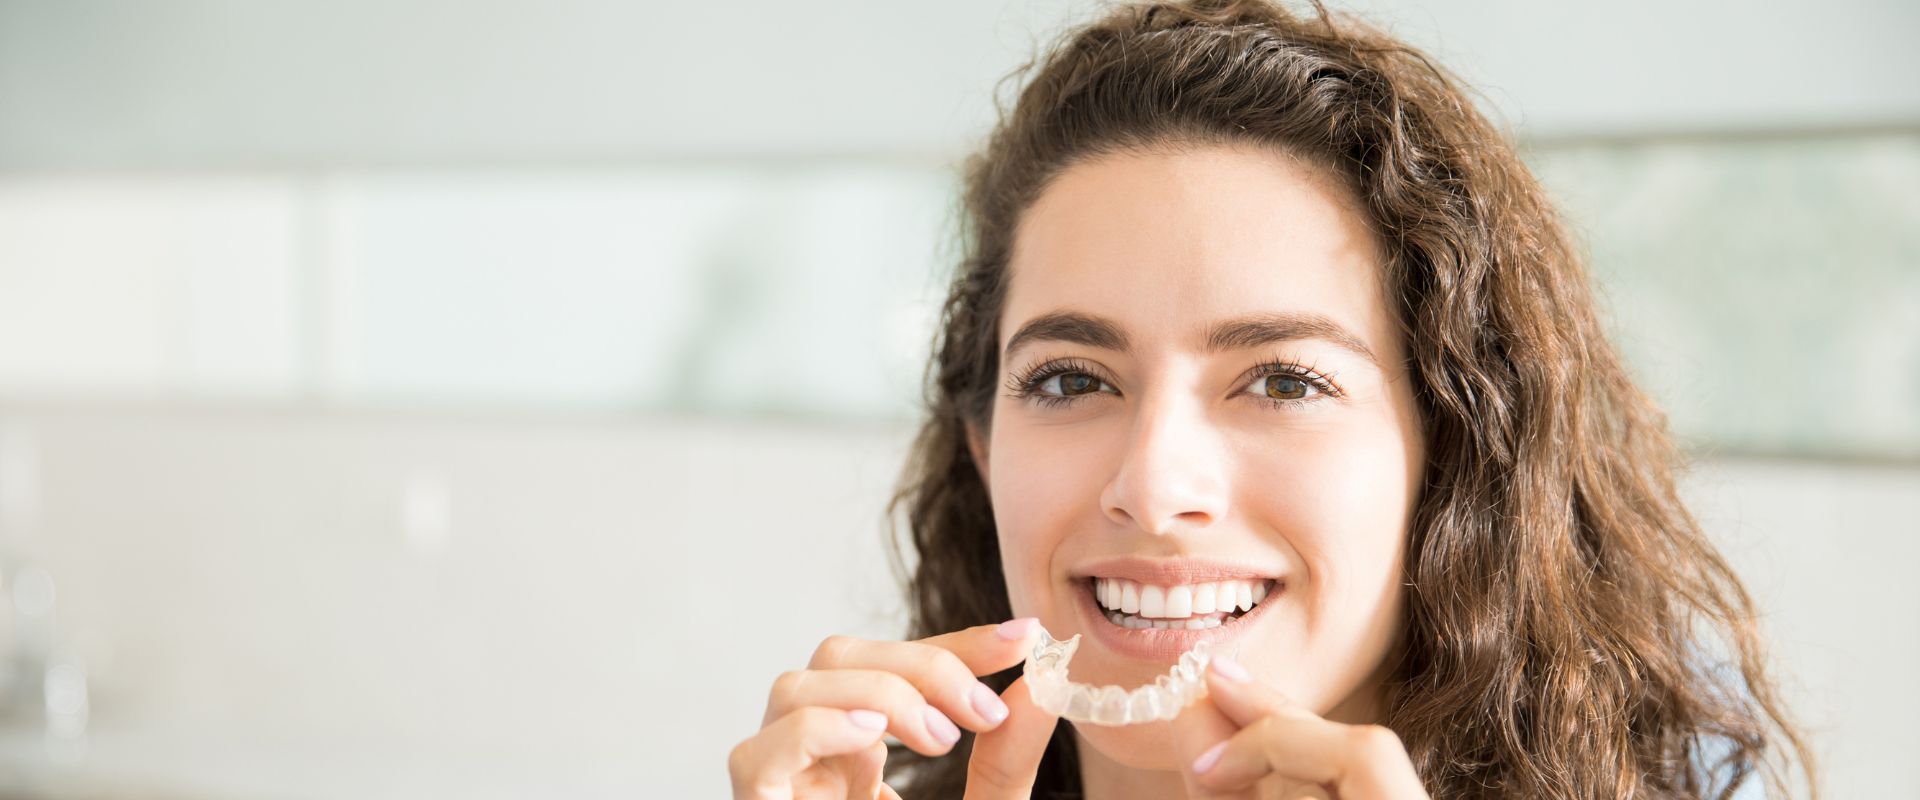 adult holds Invisalign tray and wonders "Can I use whitening toothpaste with Invisalign"